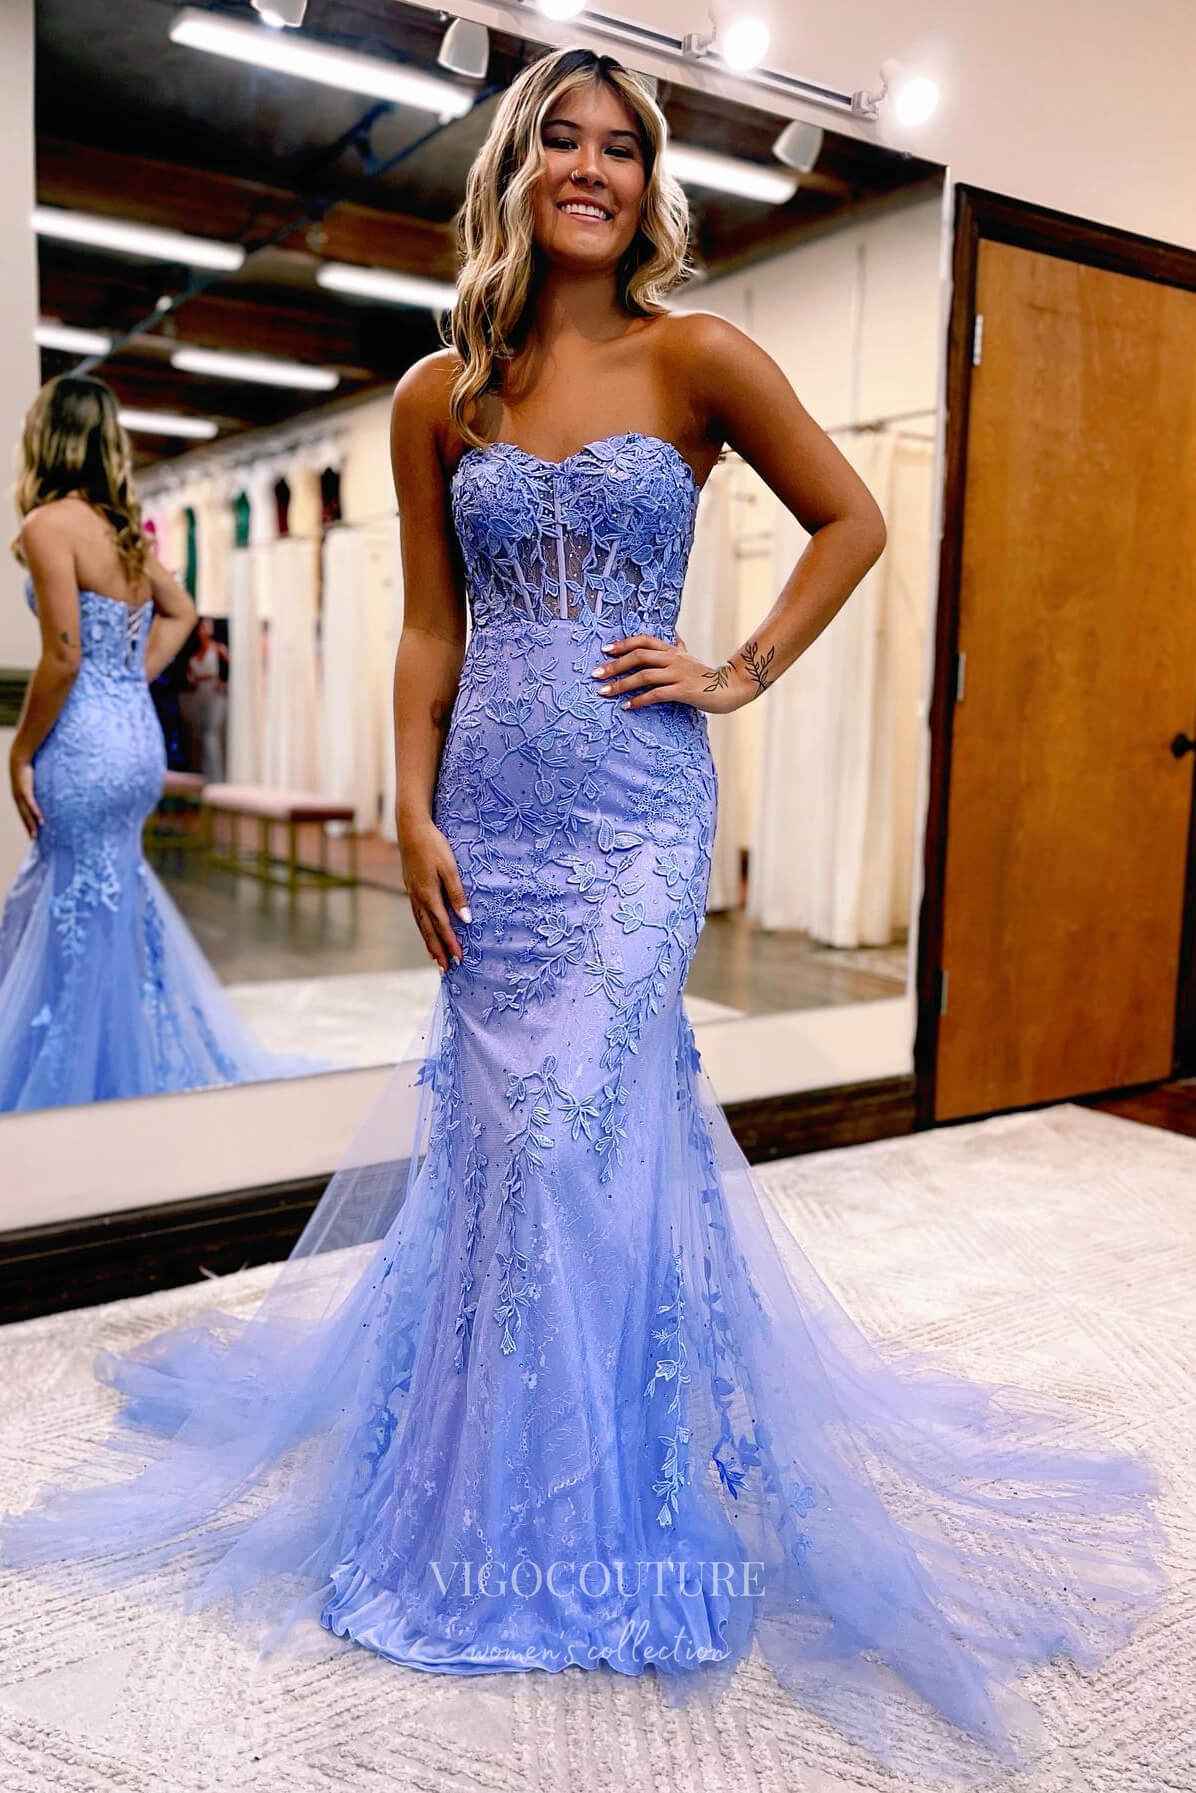 Strapless Lace Applique Prom Dresses with Corset Back Mermaid